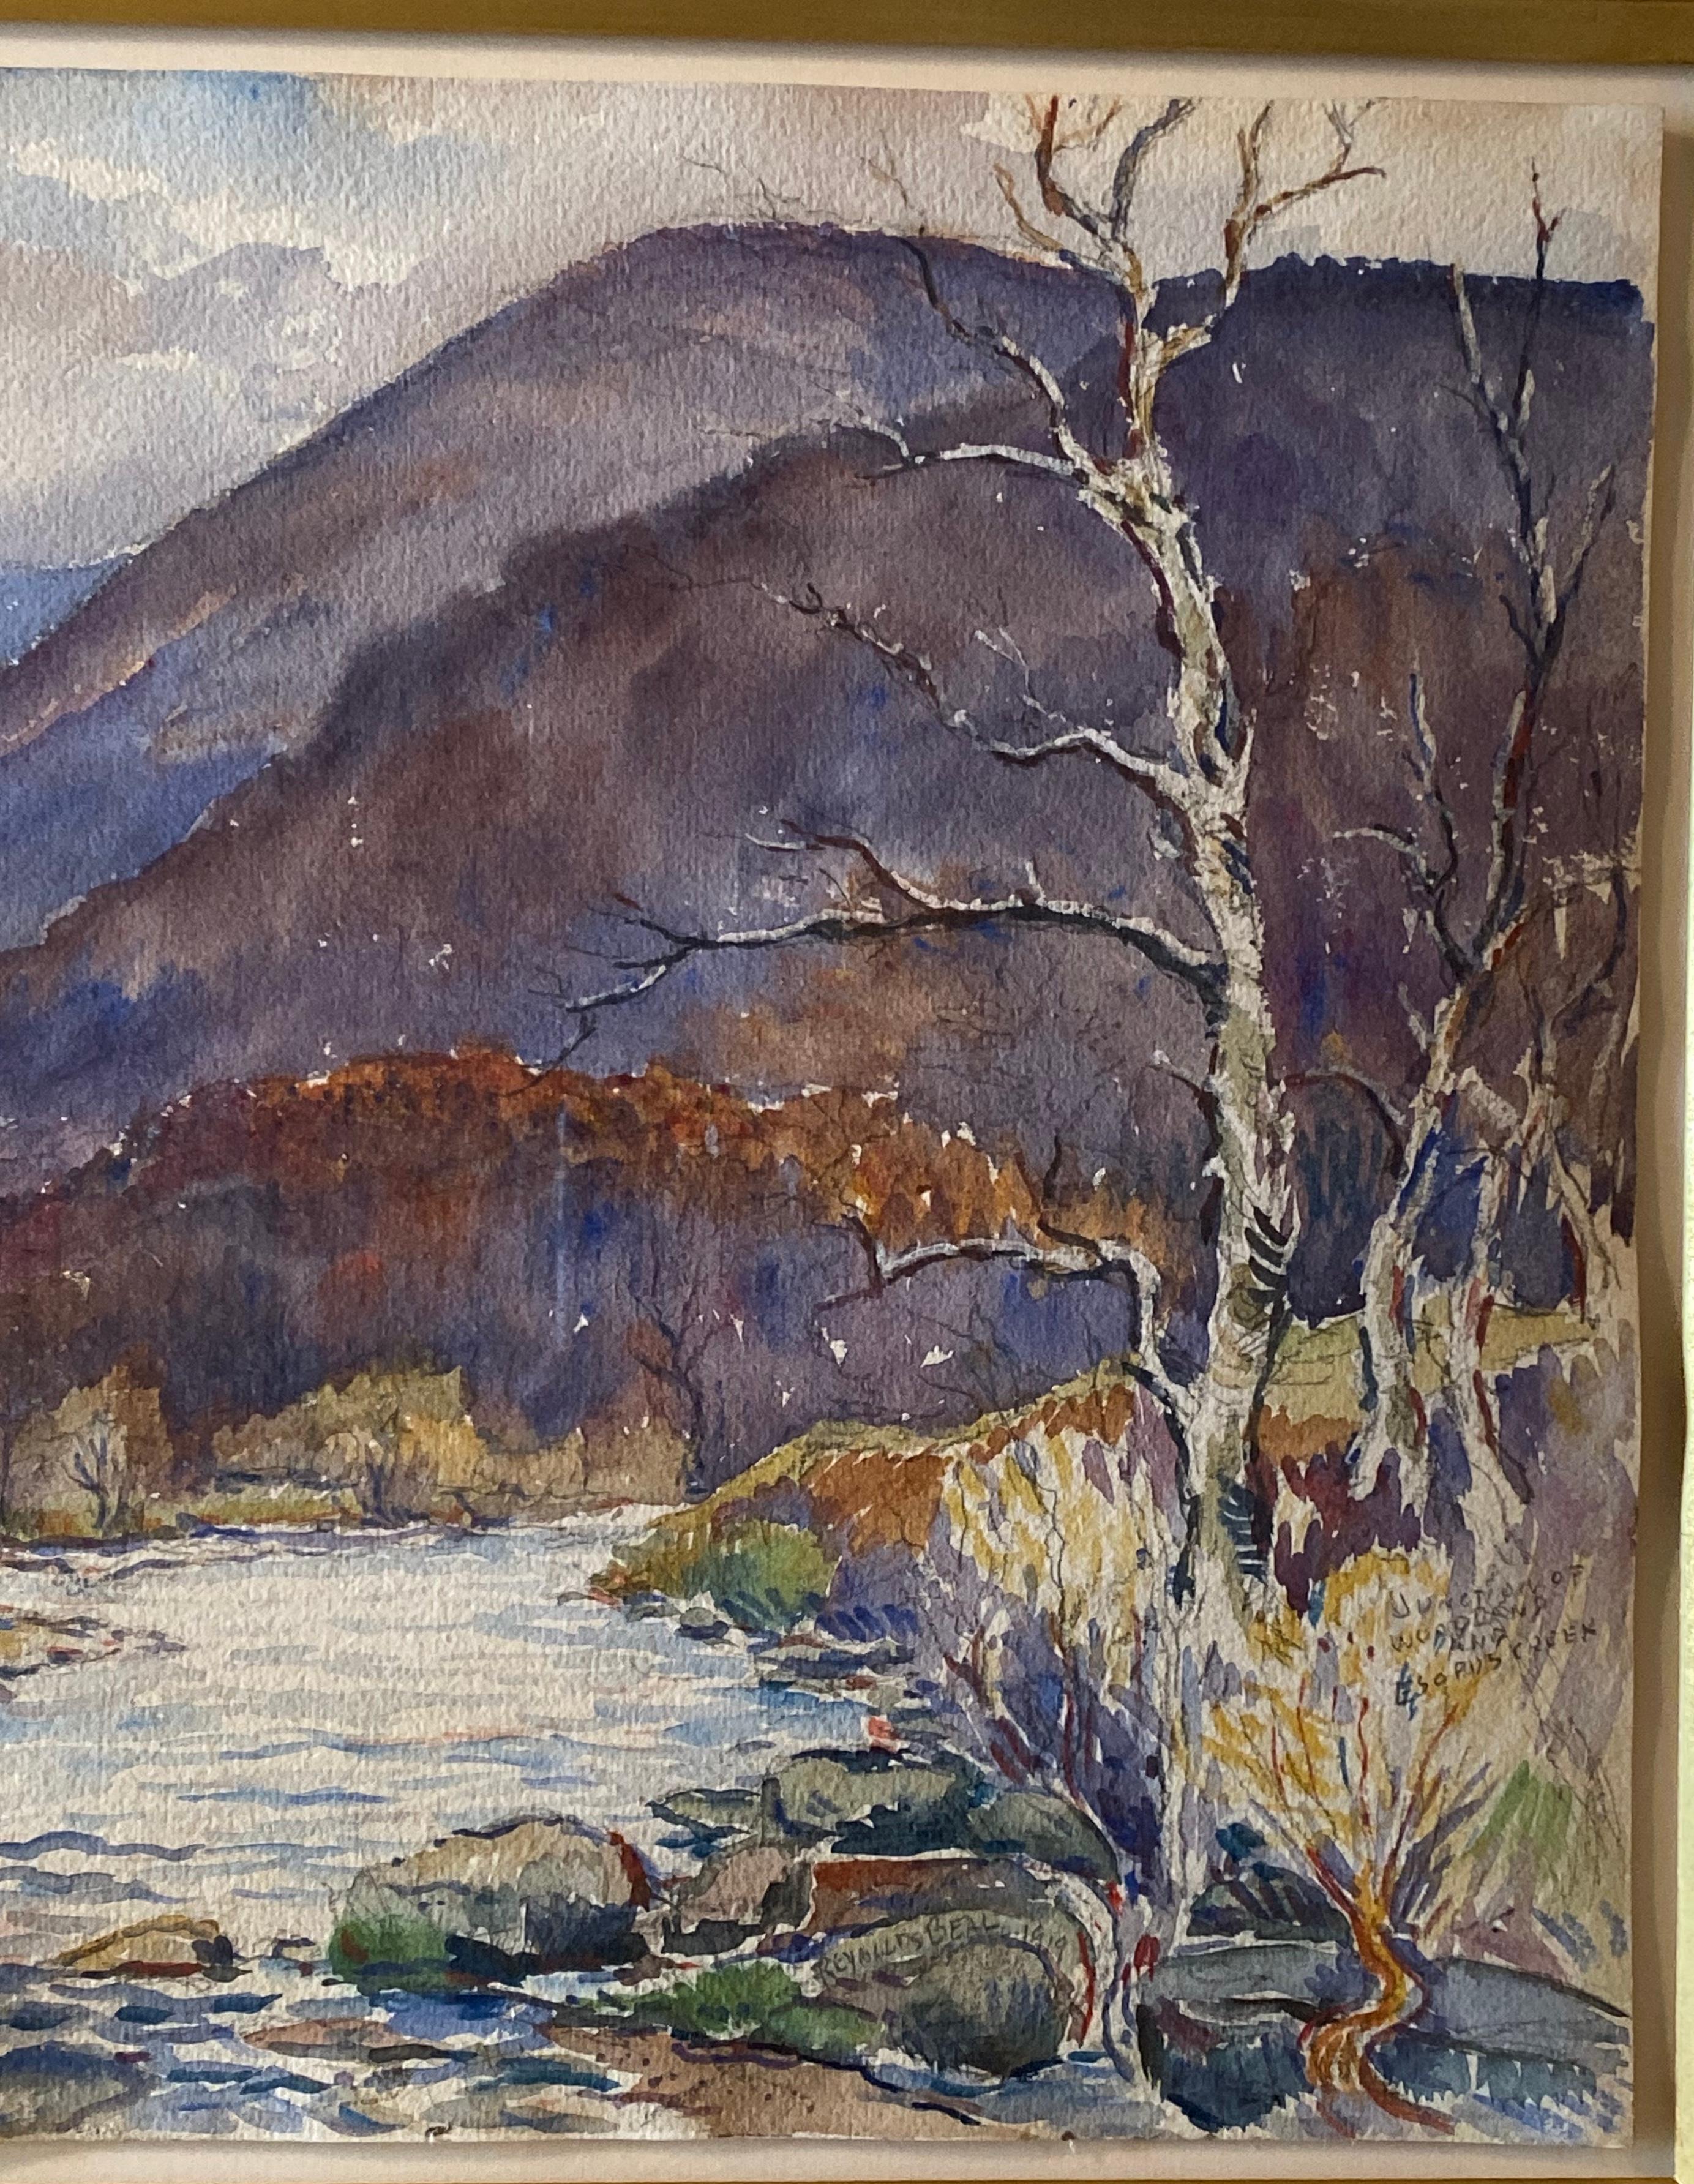 Junction of Woodland and Esopus Creek - Post-Impressionist Art by Reynolds Beal